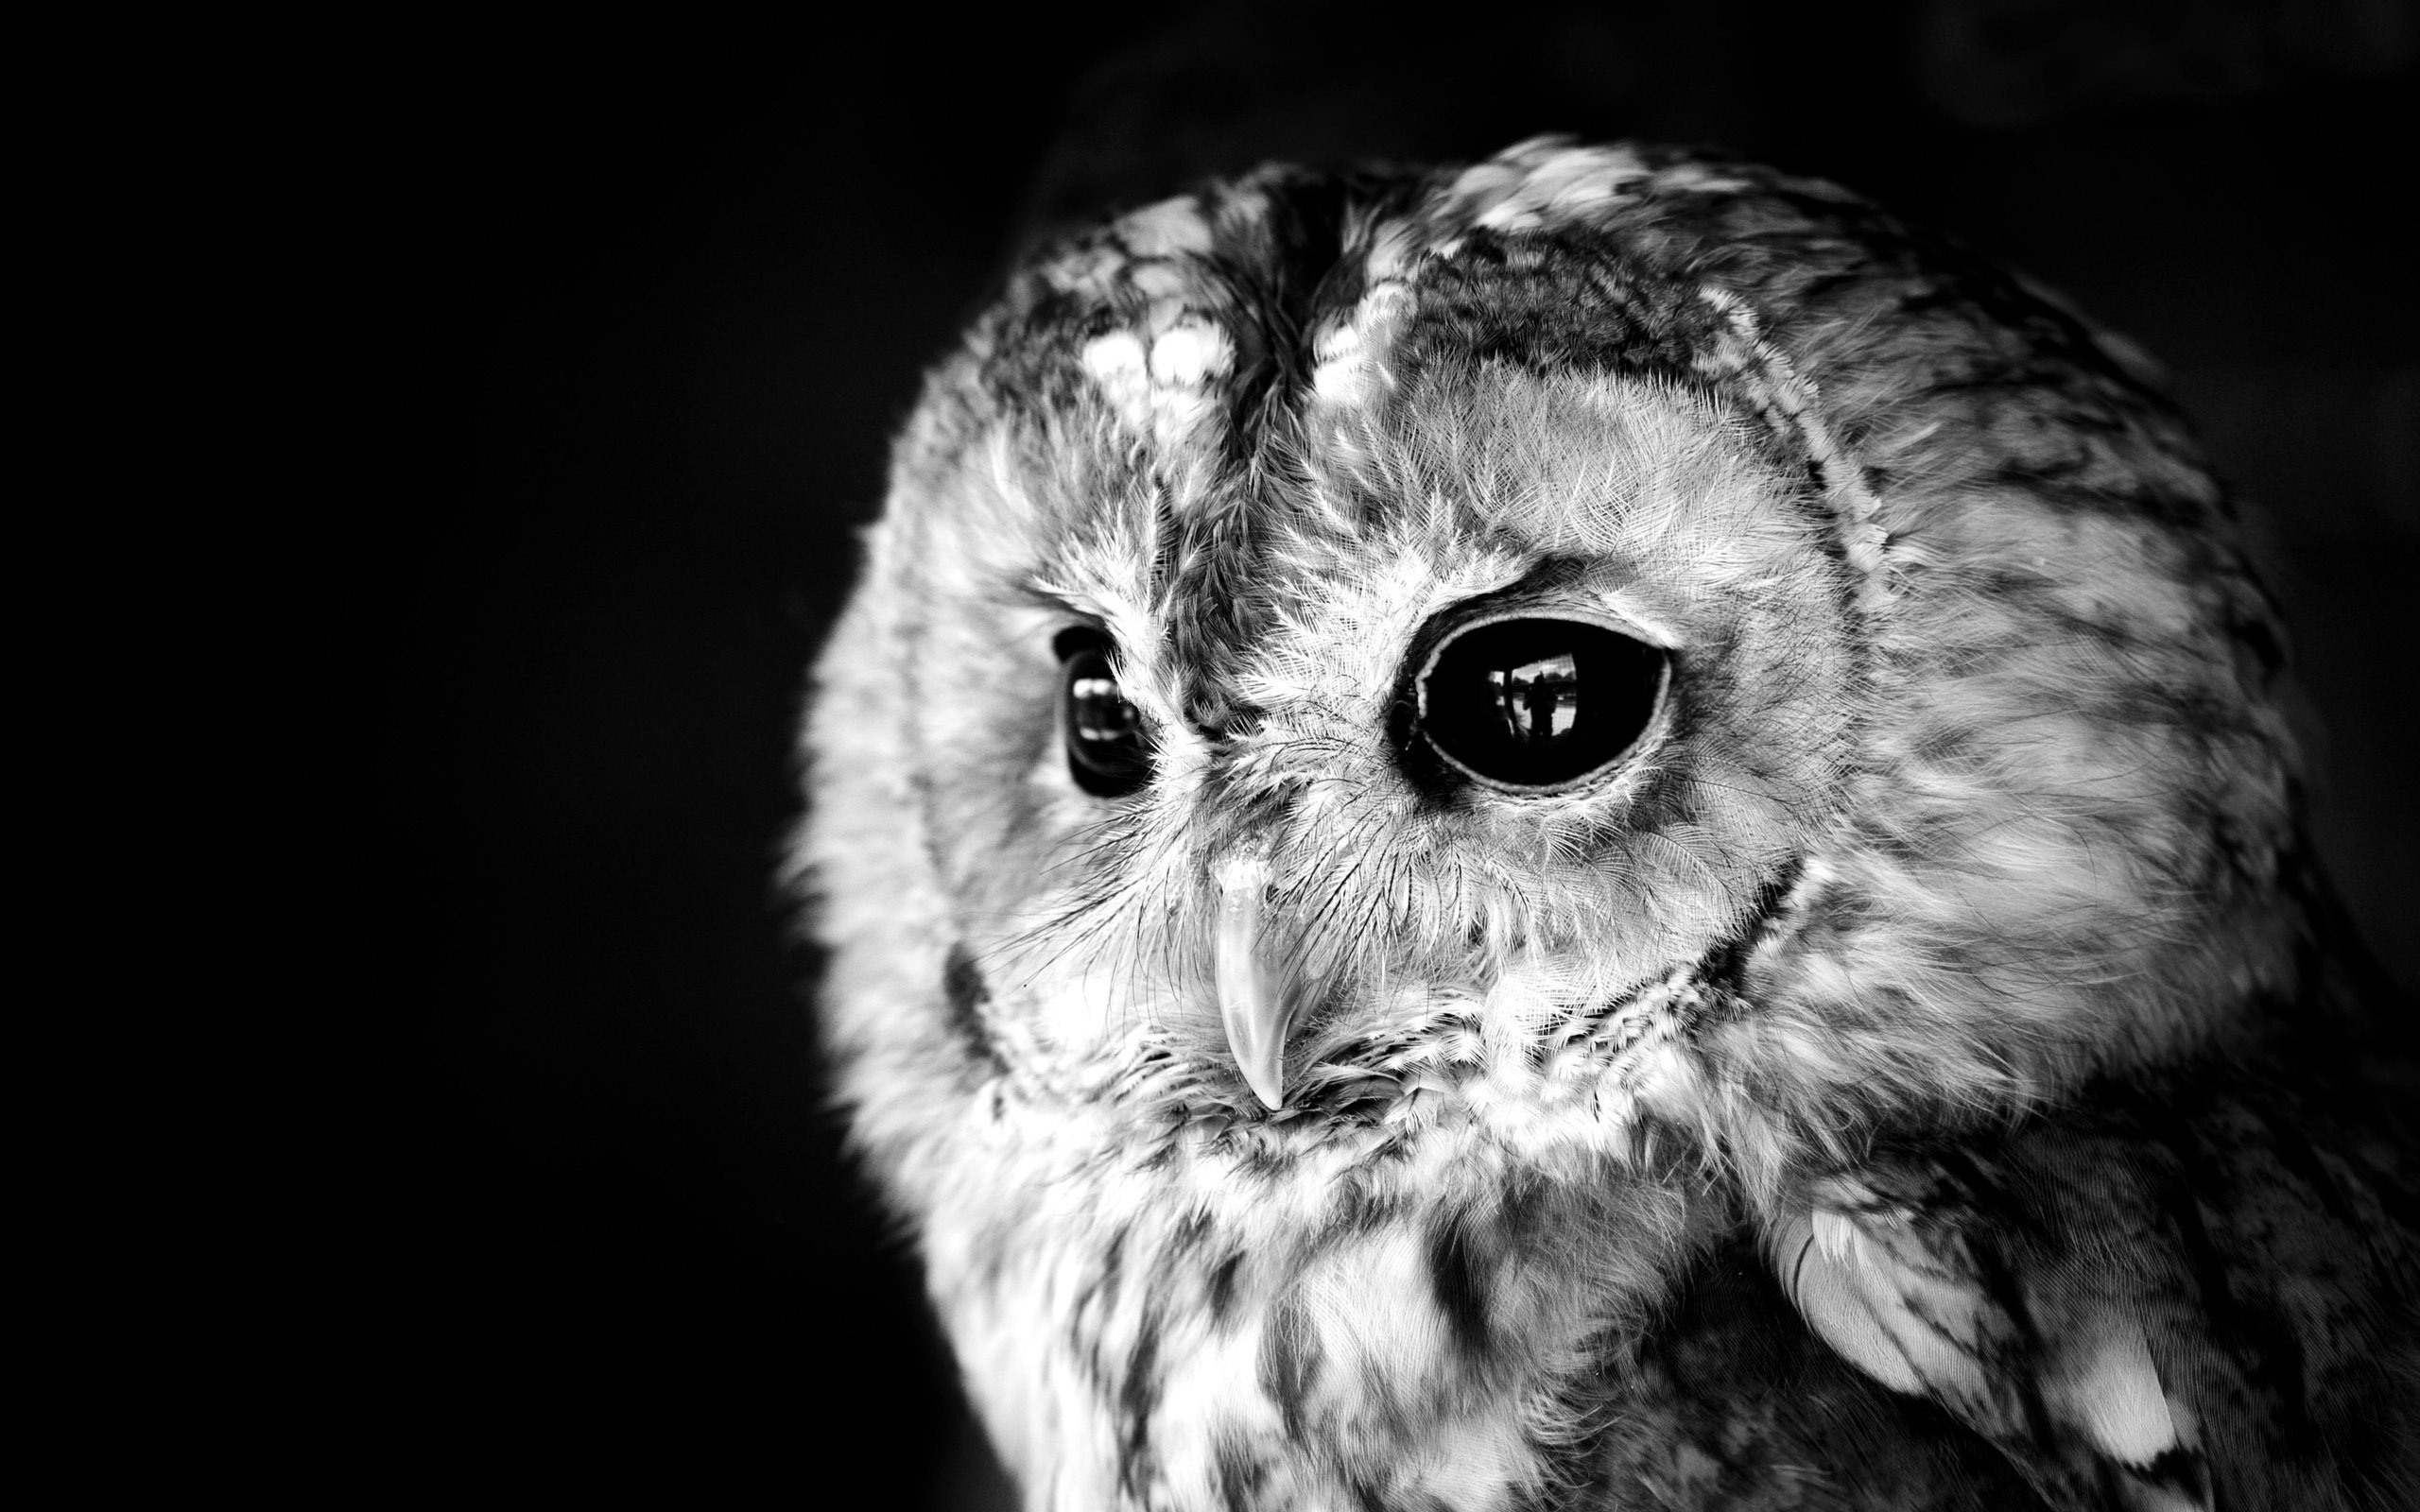 HD Owl Wallpapers Backgrounds download.